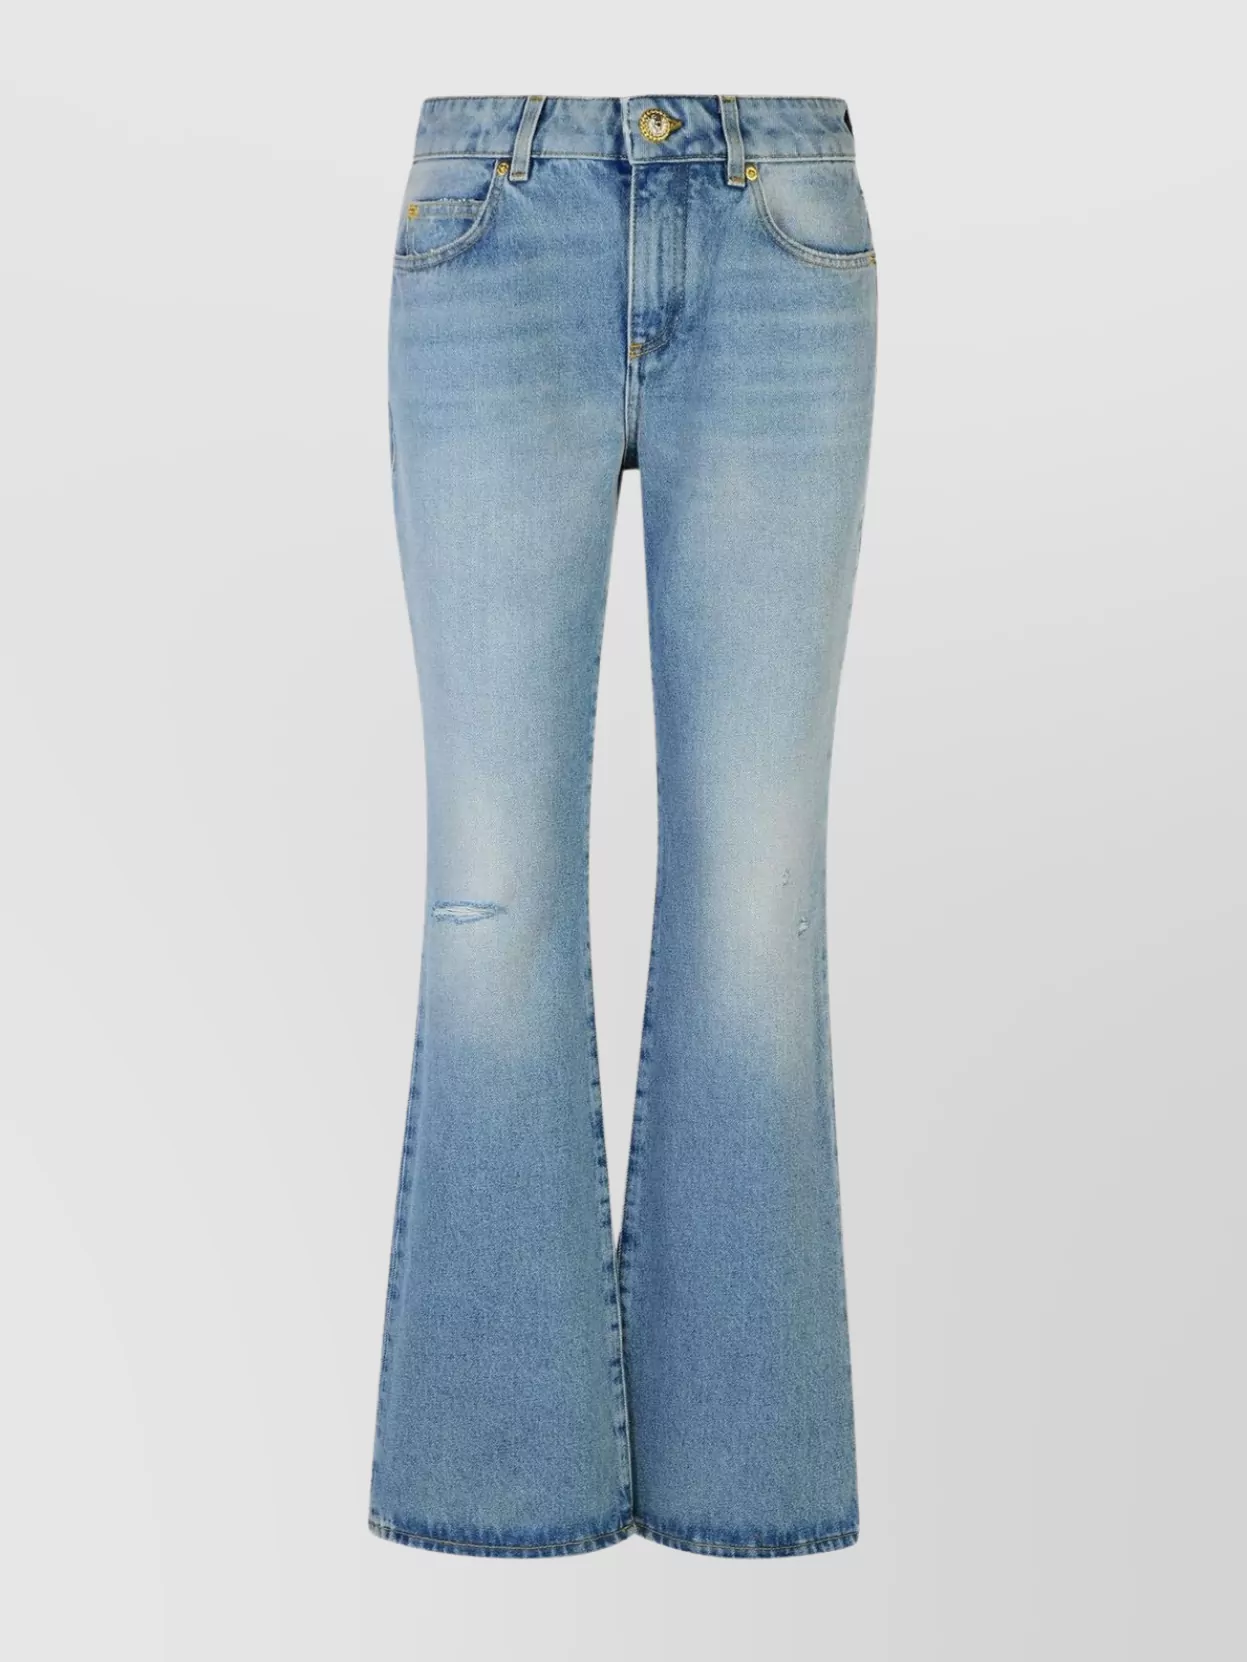 Balmain Flared Cotton Jeans Distressed Finish In Blue